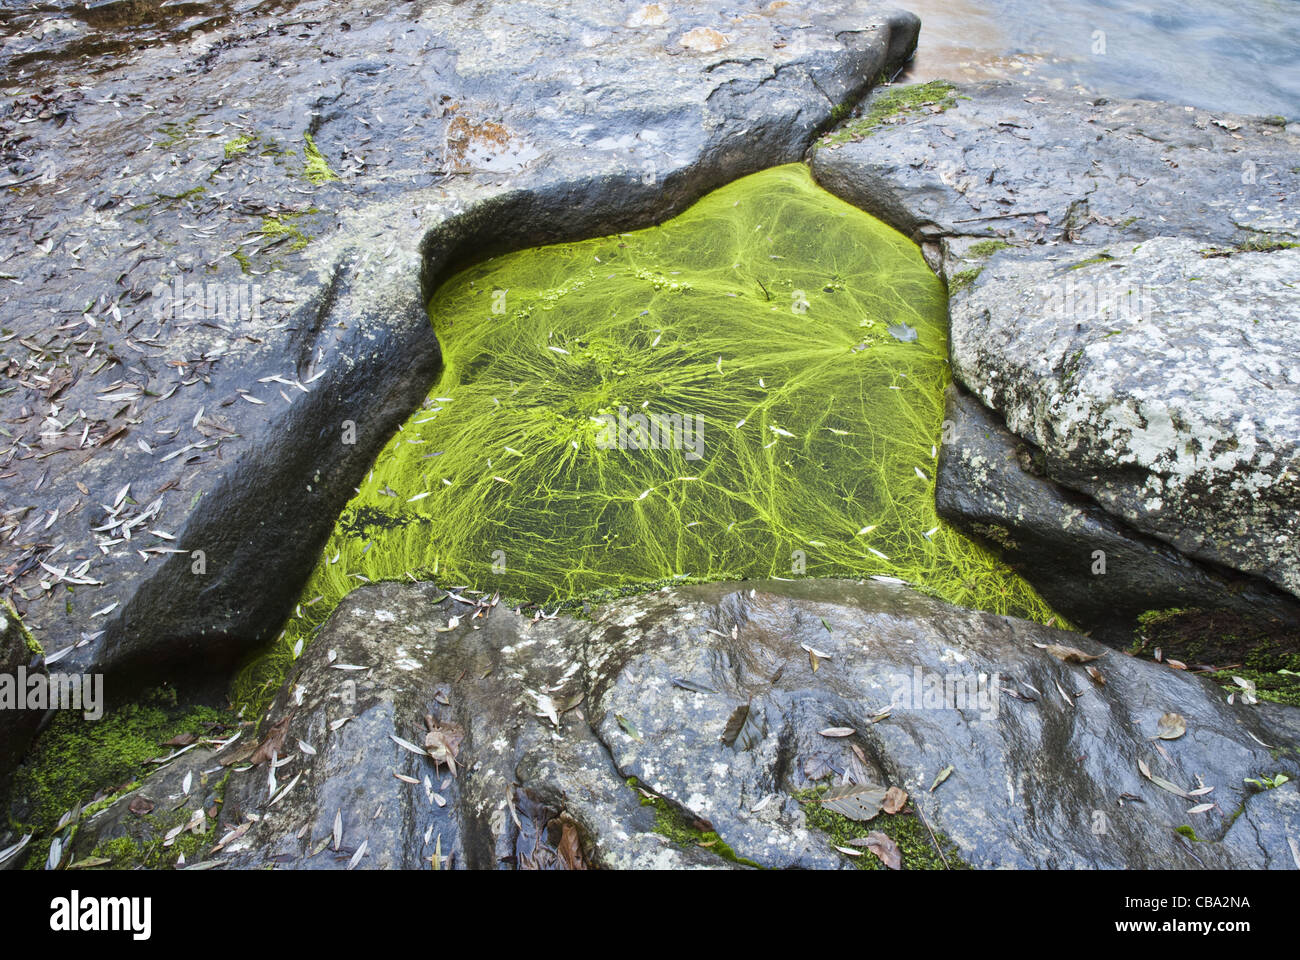 Blue-green algae  of the genus Nostoc (cyanobacteria), cover a puddle of freshwater among the rocks. Stock Photo